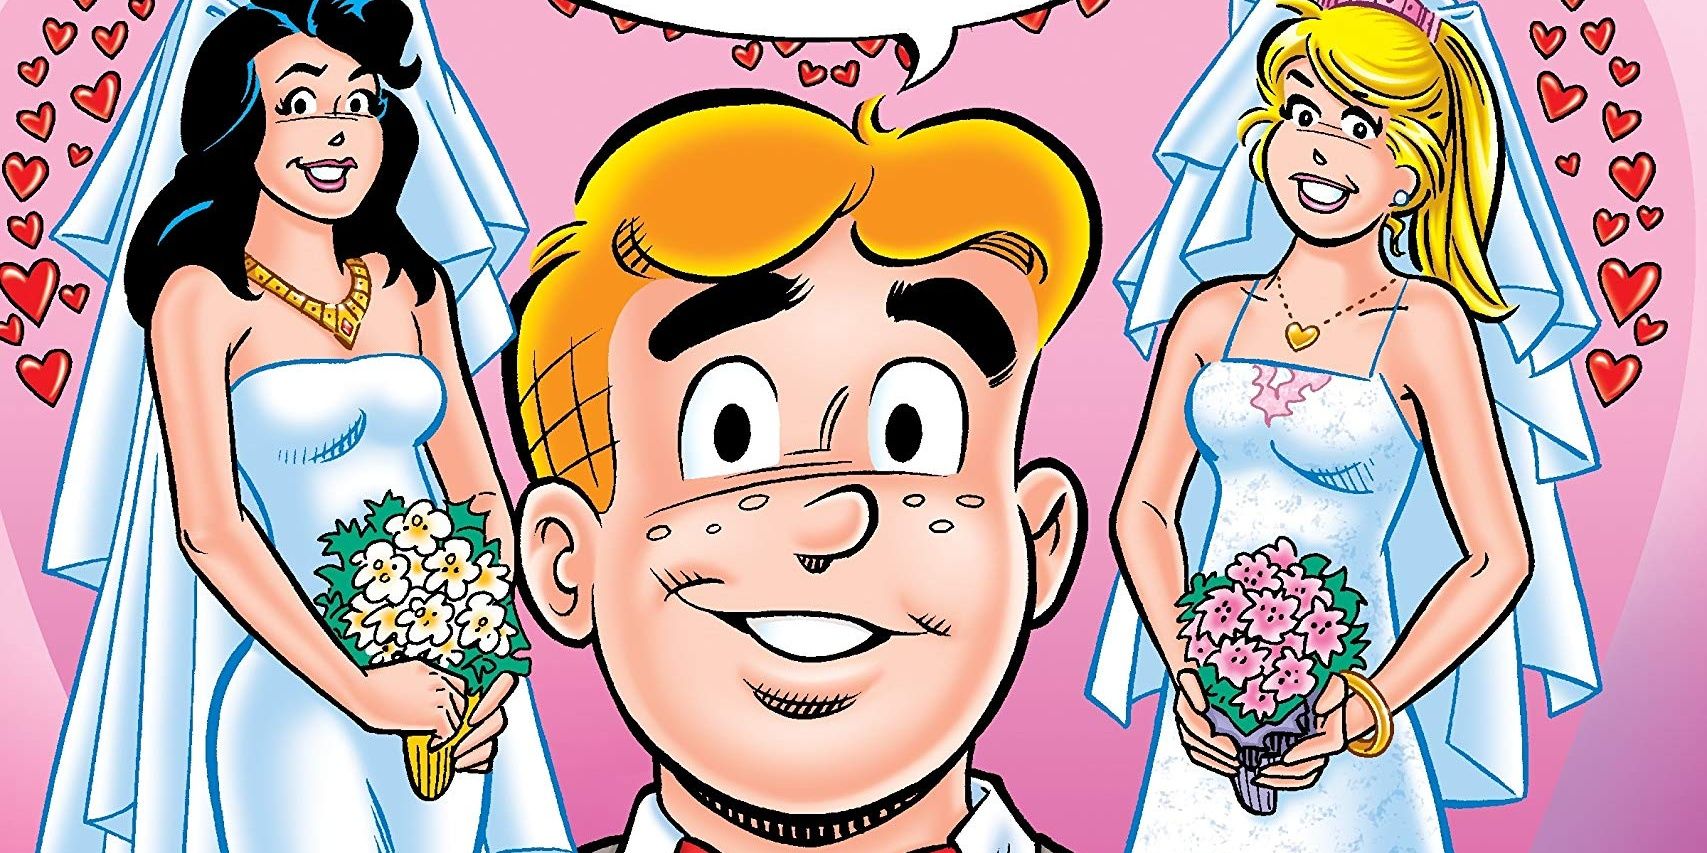 Archie smiling with Veronica on his left, and Betty on his right, both wearing wedding dresses.